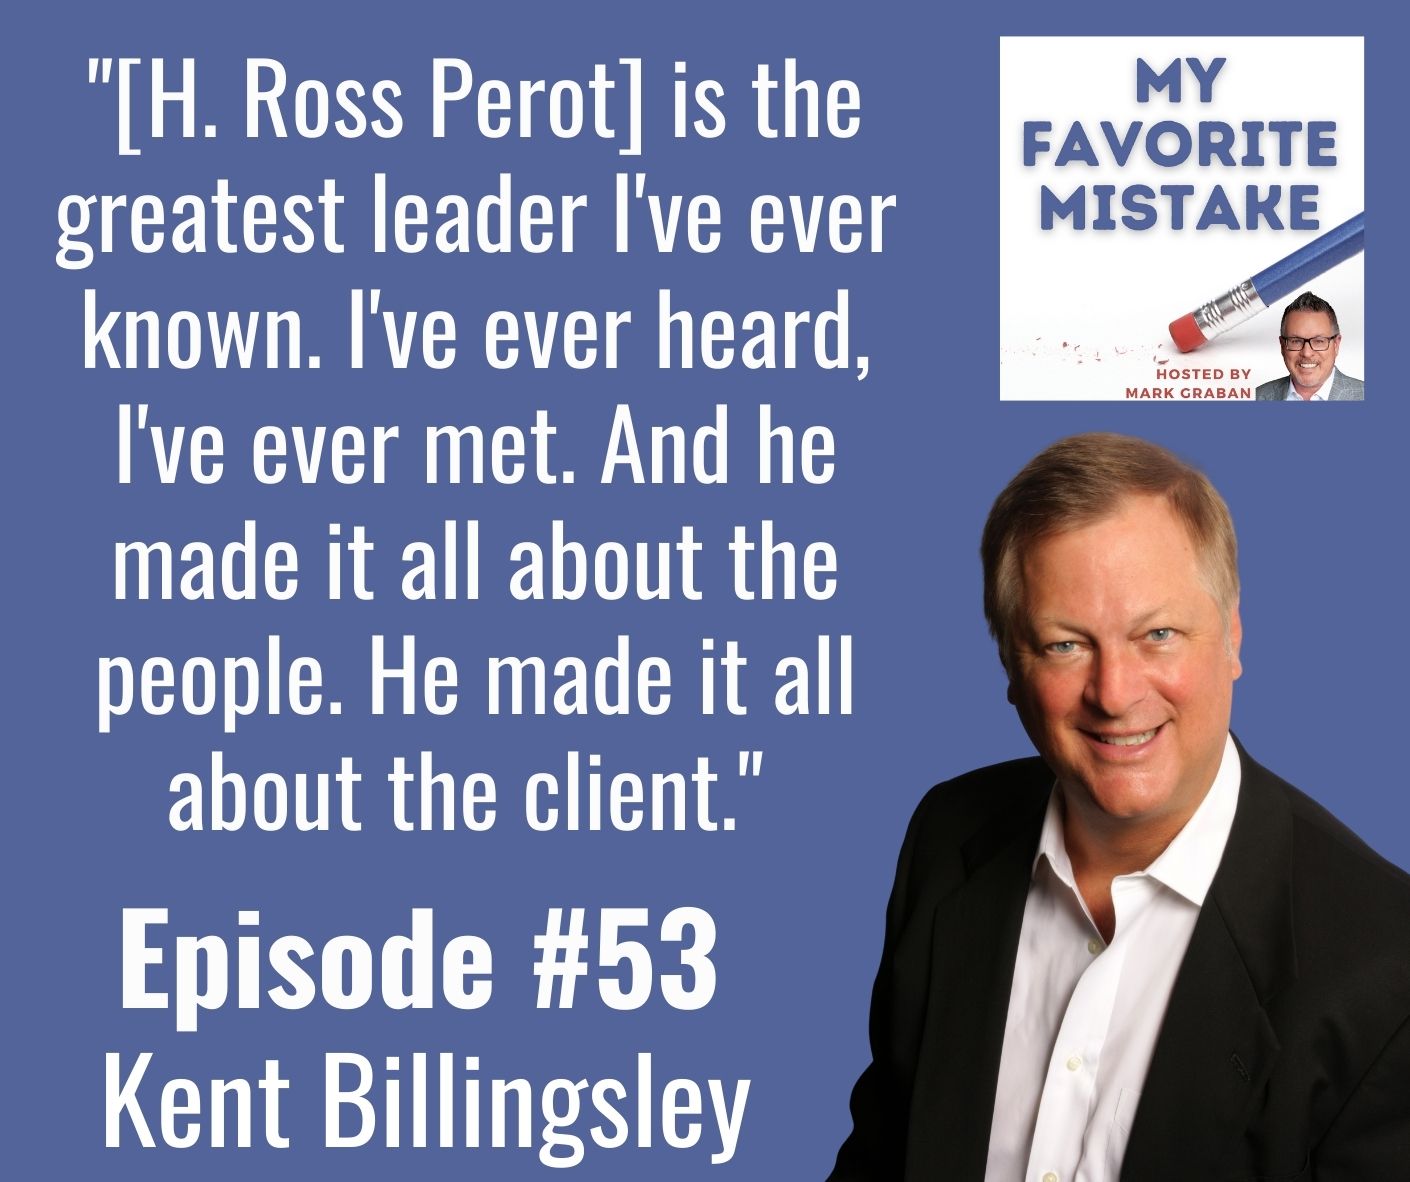 Kent Billingsley My Favorite Mistake Ross Perot"[H. Ross Perot] is the greatest leader I've ever known. I've ever heard, I've ever met. And he made it all about the people. He made it all about the client." 